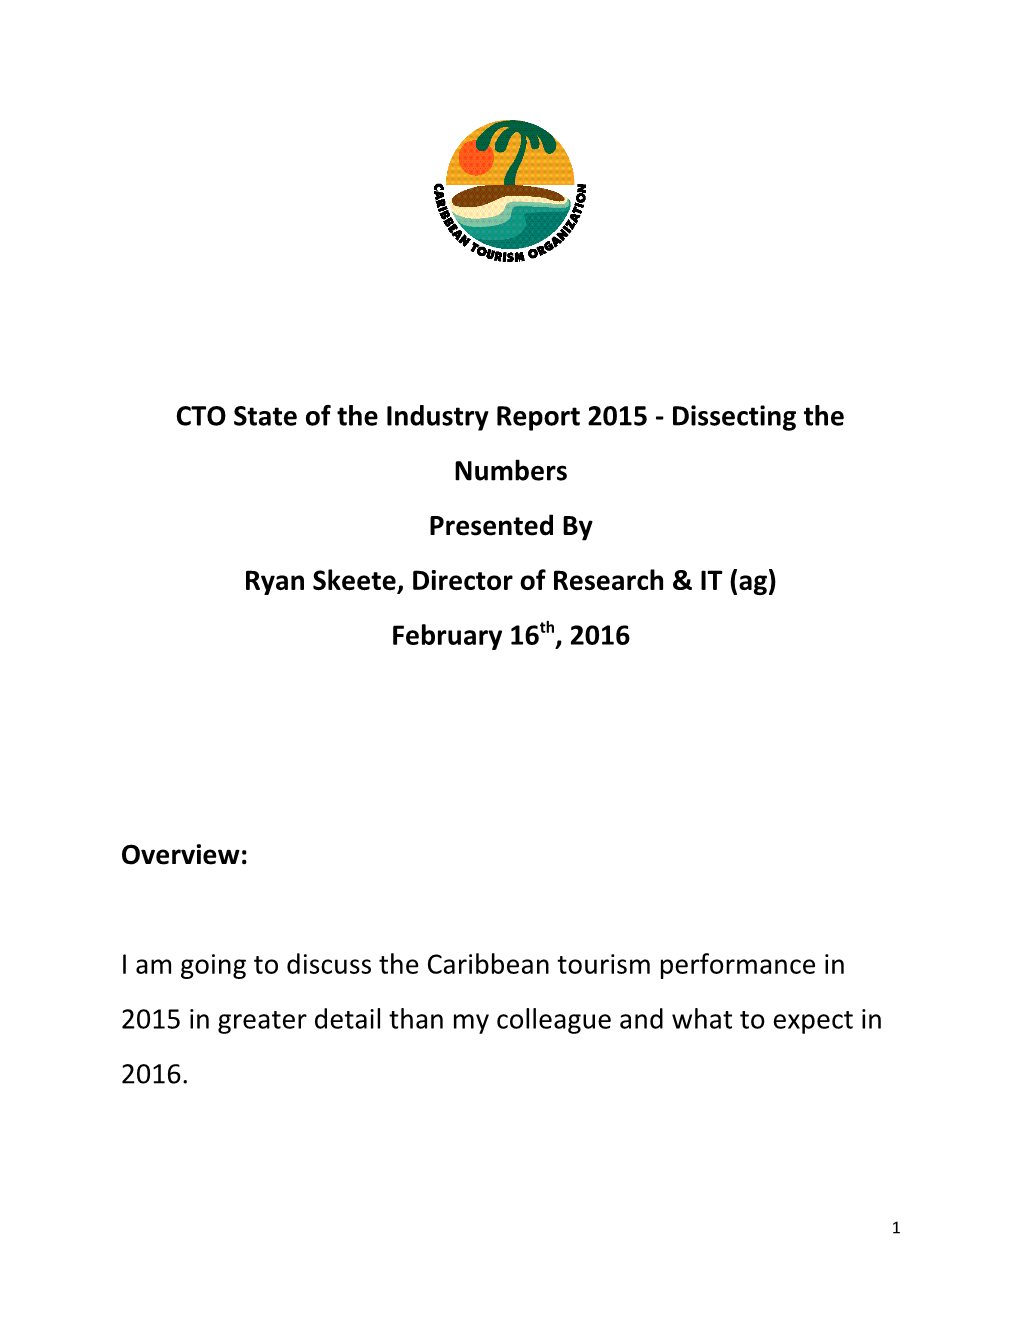 CTO State of the Industry Report 2015 - Dissecting the Numbers